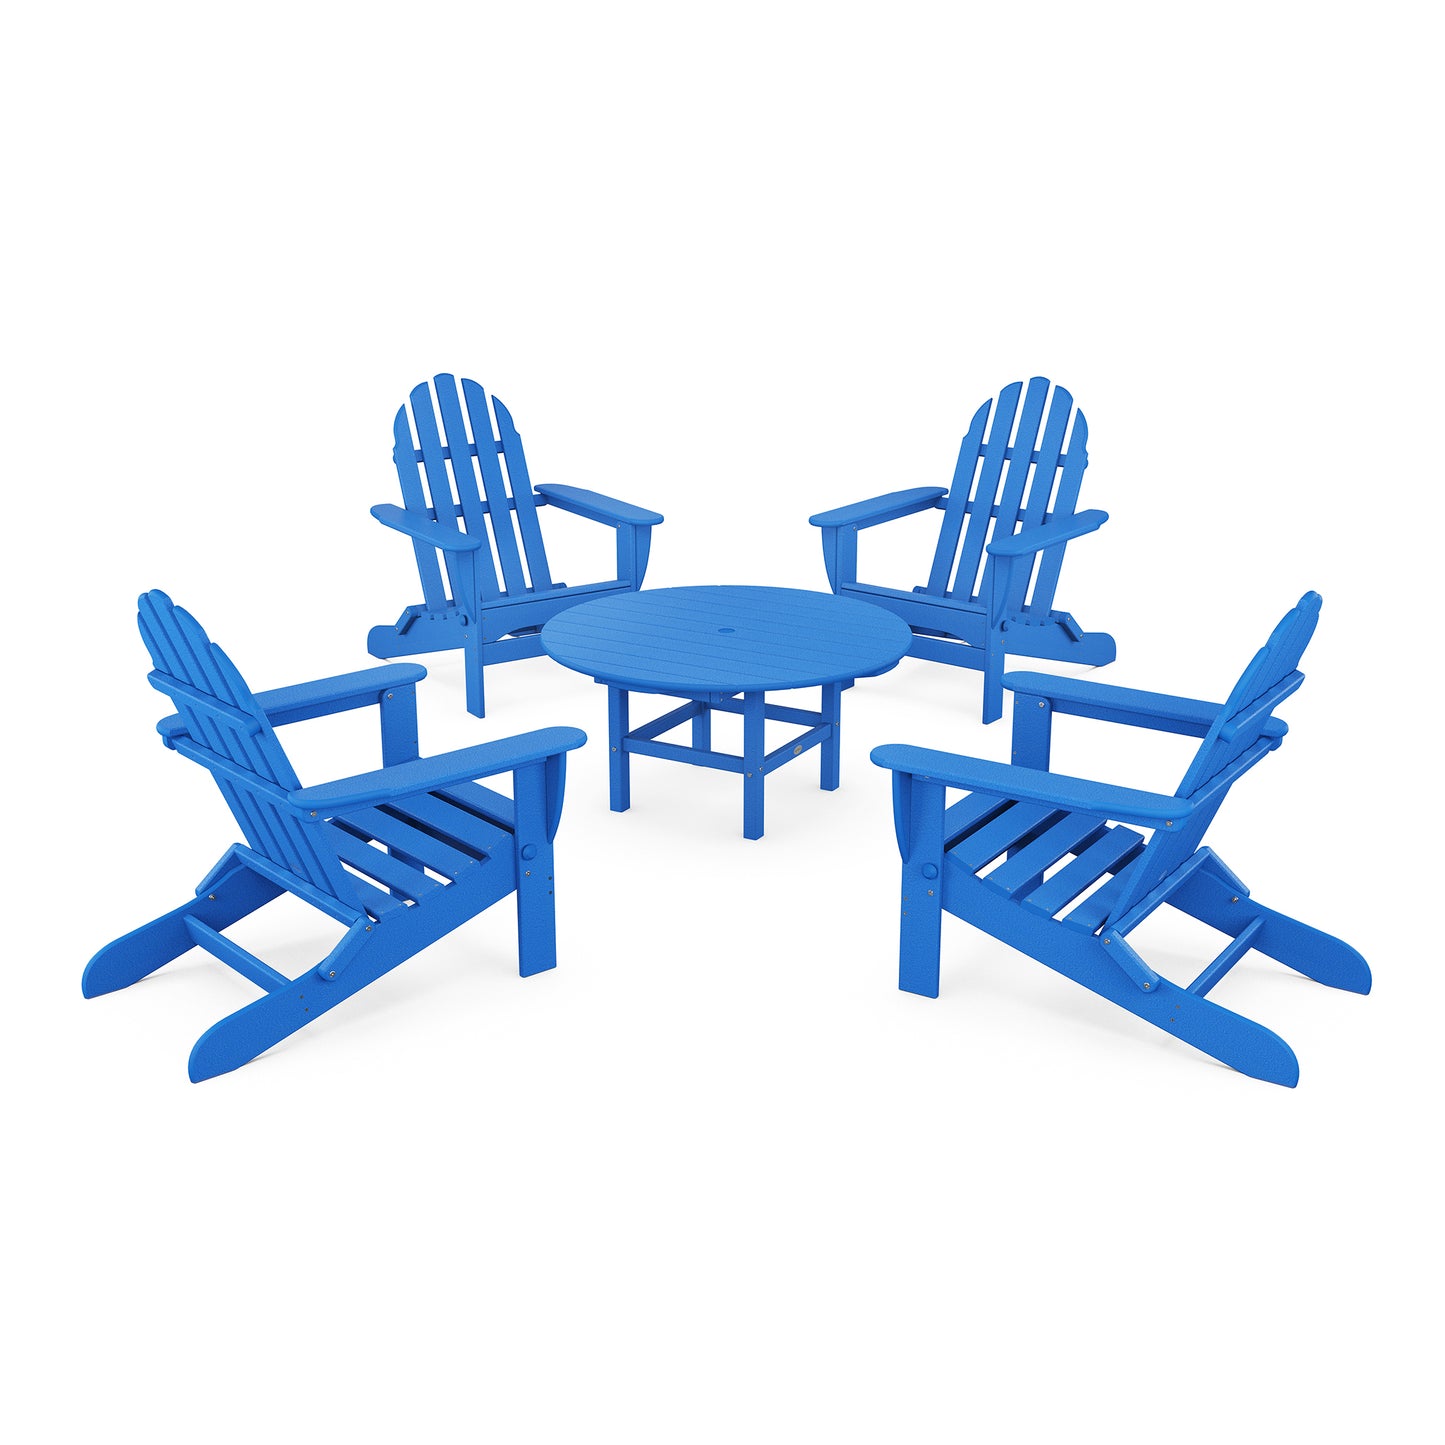 Four blue POLYWOOD Classic Folding Adirondack chairs arranged around a small circular table, all set on a plain white background.